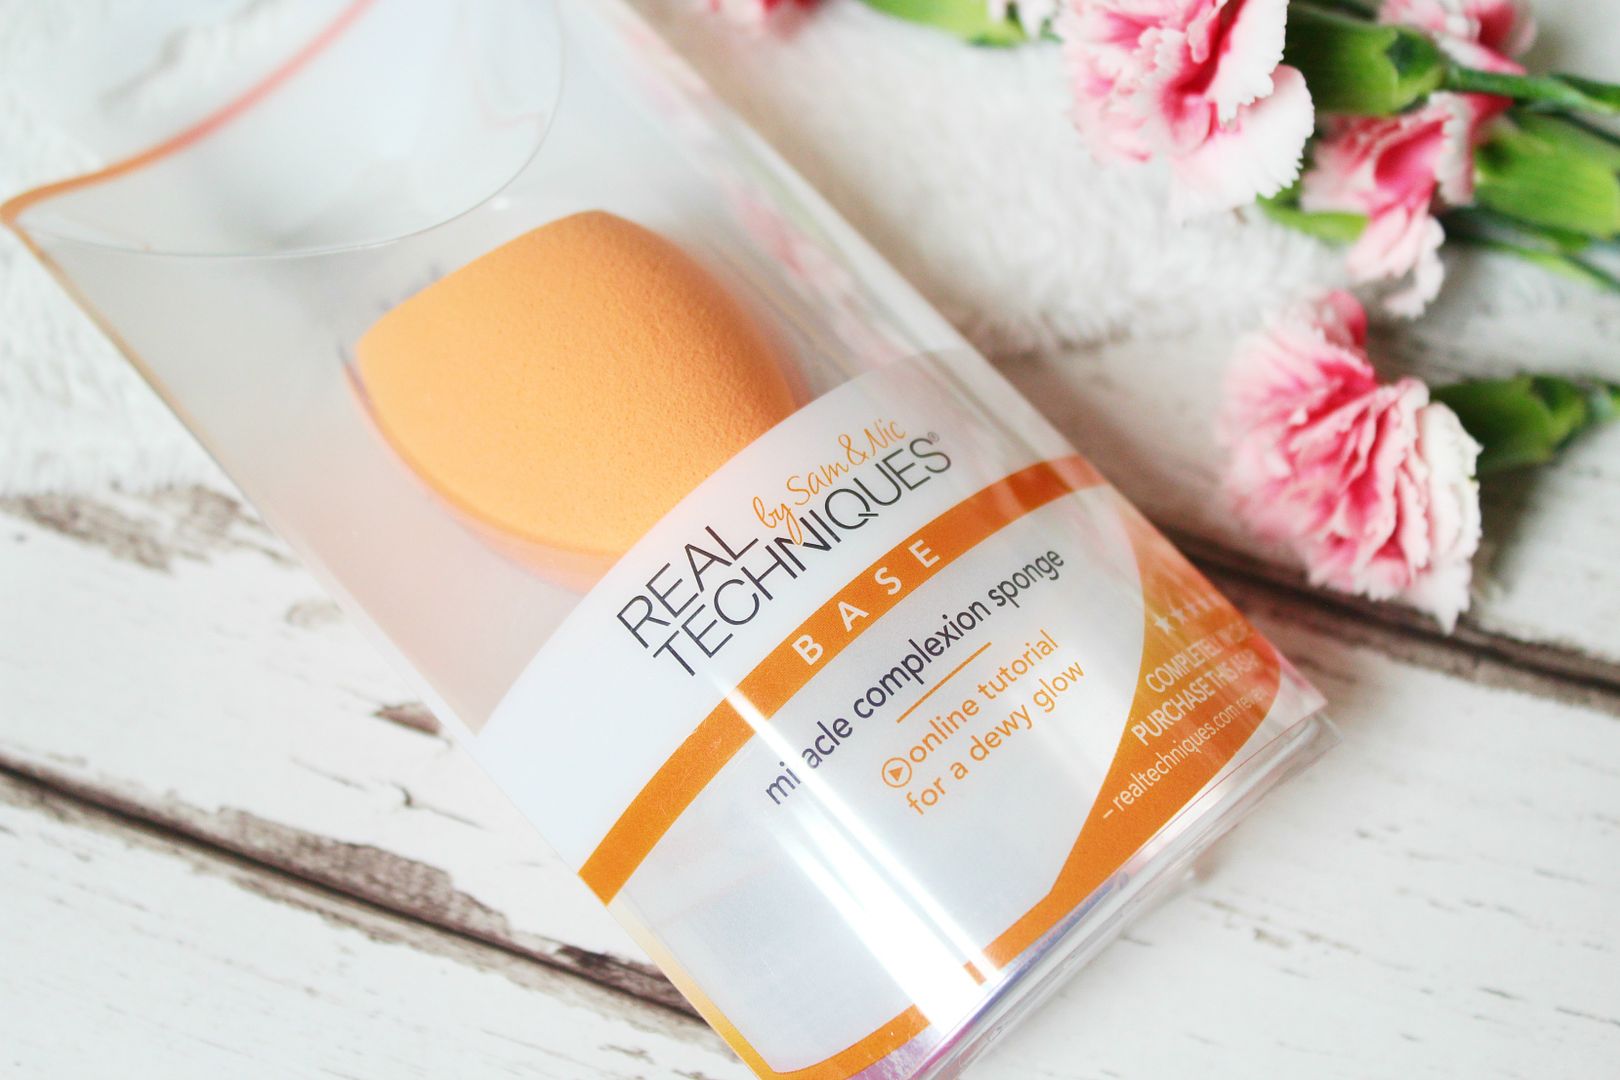 Real Techniques Miracle Complexion Sponge Foundation Base Review Close Up Belle-Amie UK Beauty Fashion Lifestyle Blog